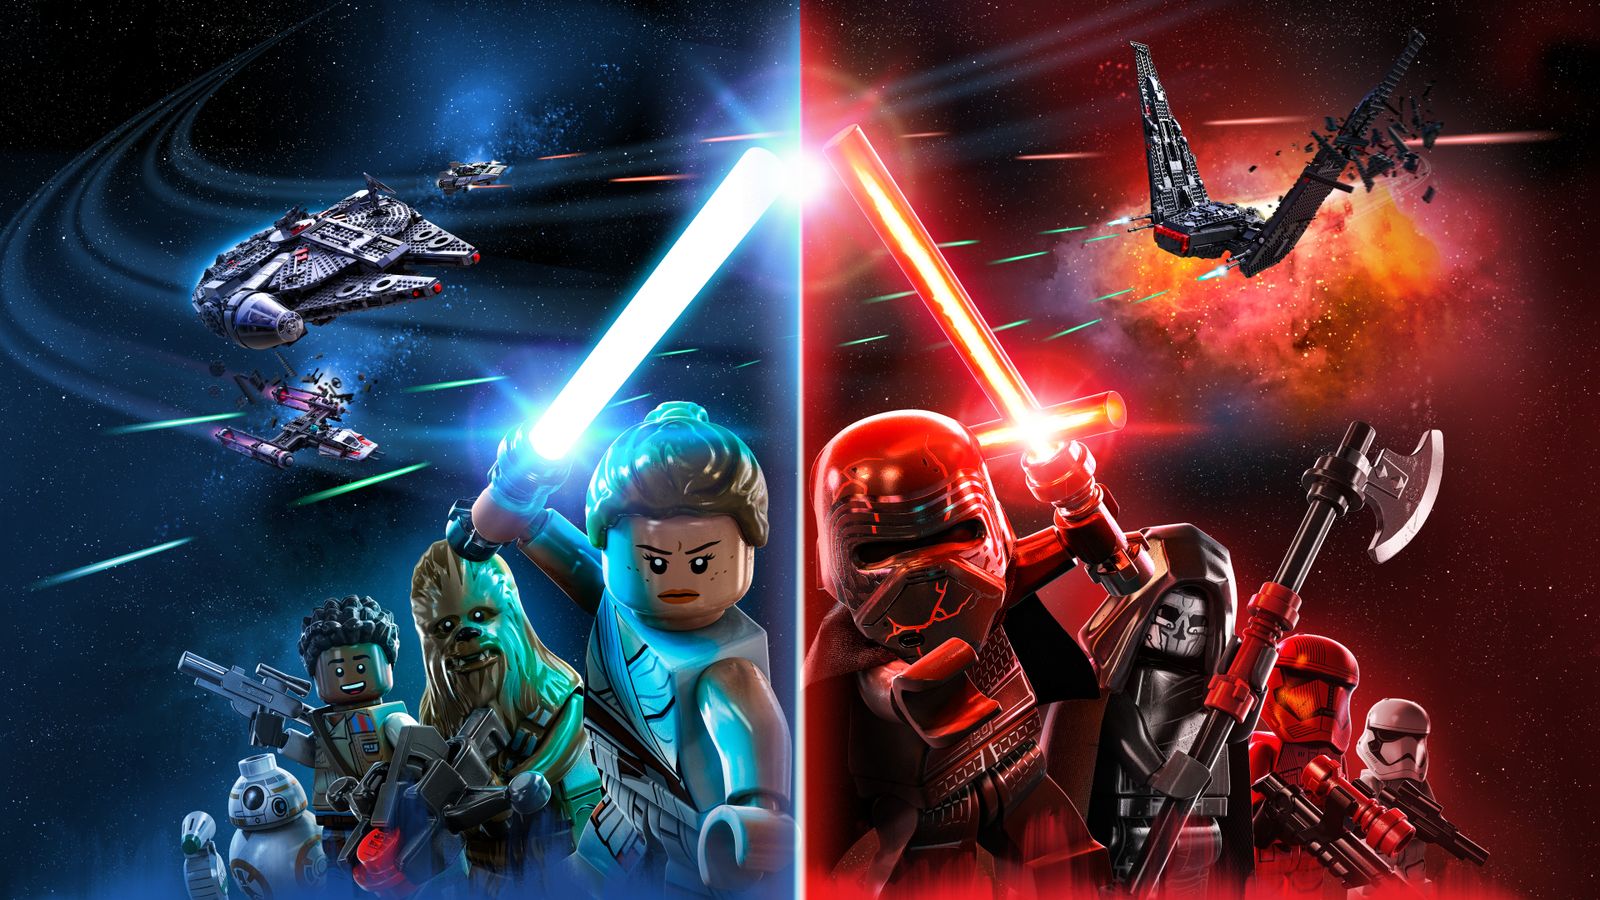 Lego Star Wars Wallpapers